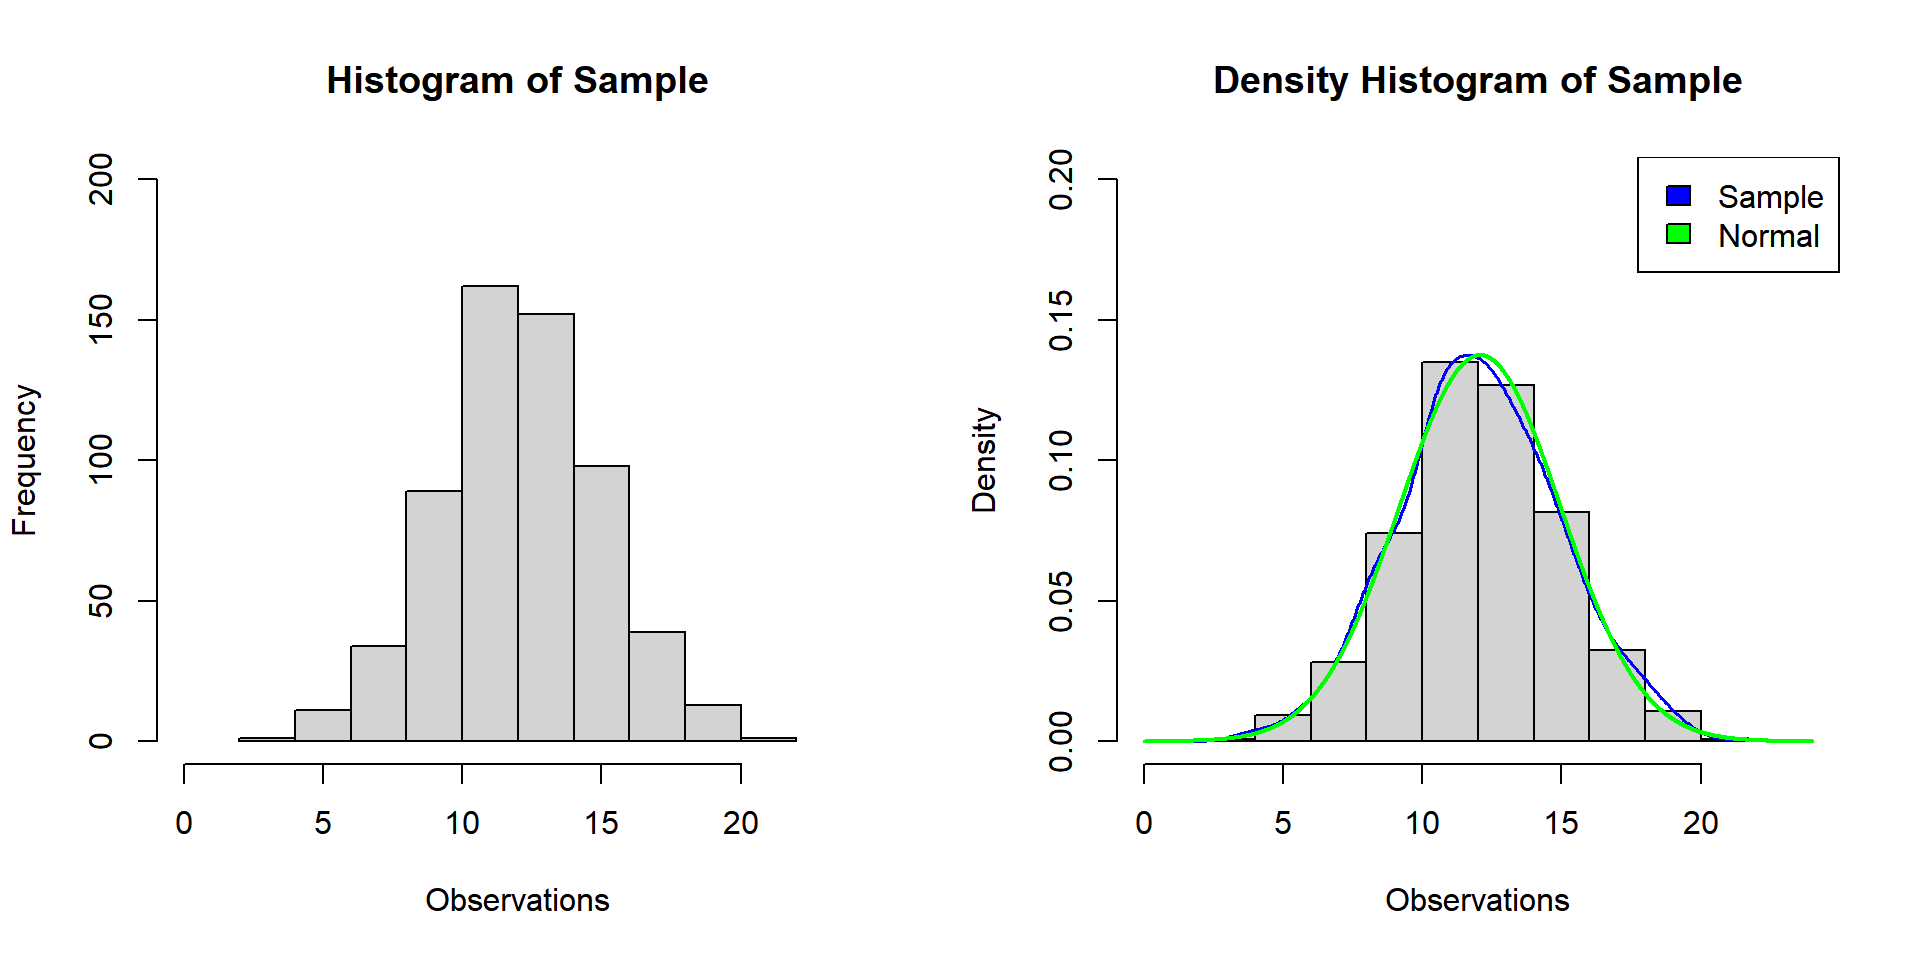 Example 1: Histogram and Density Histogram for Normality Test in R